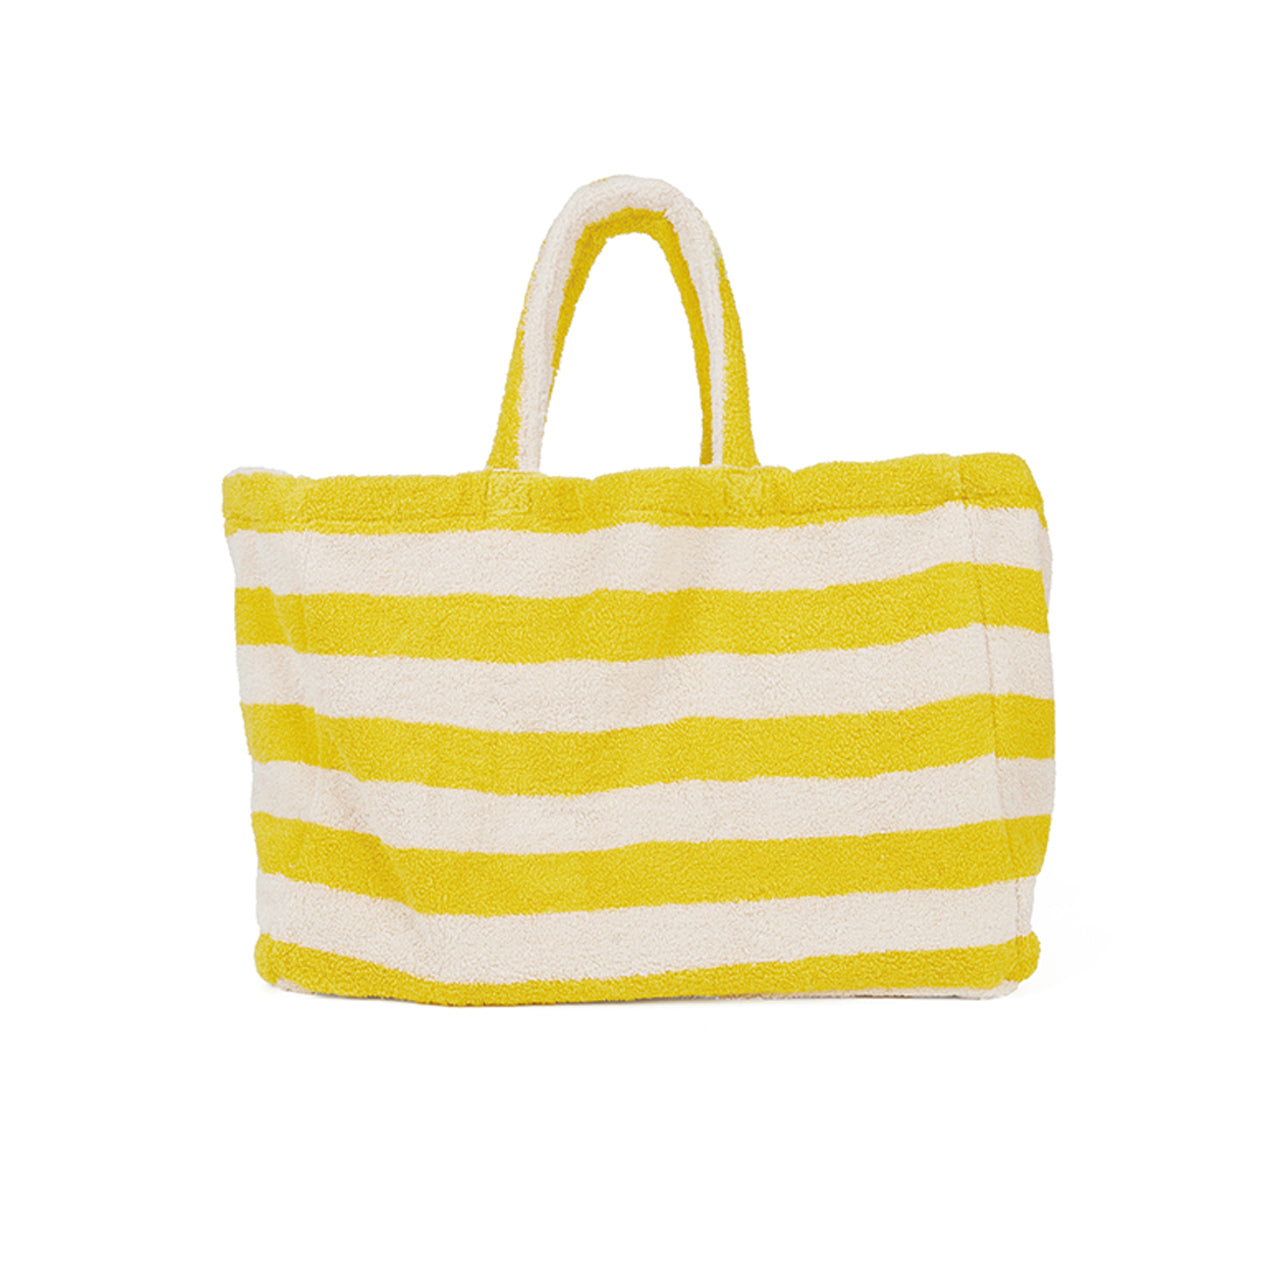 A-1560 Striped Terry Tote Bag